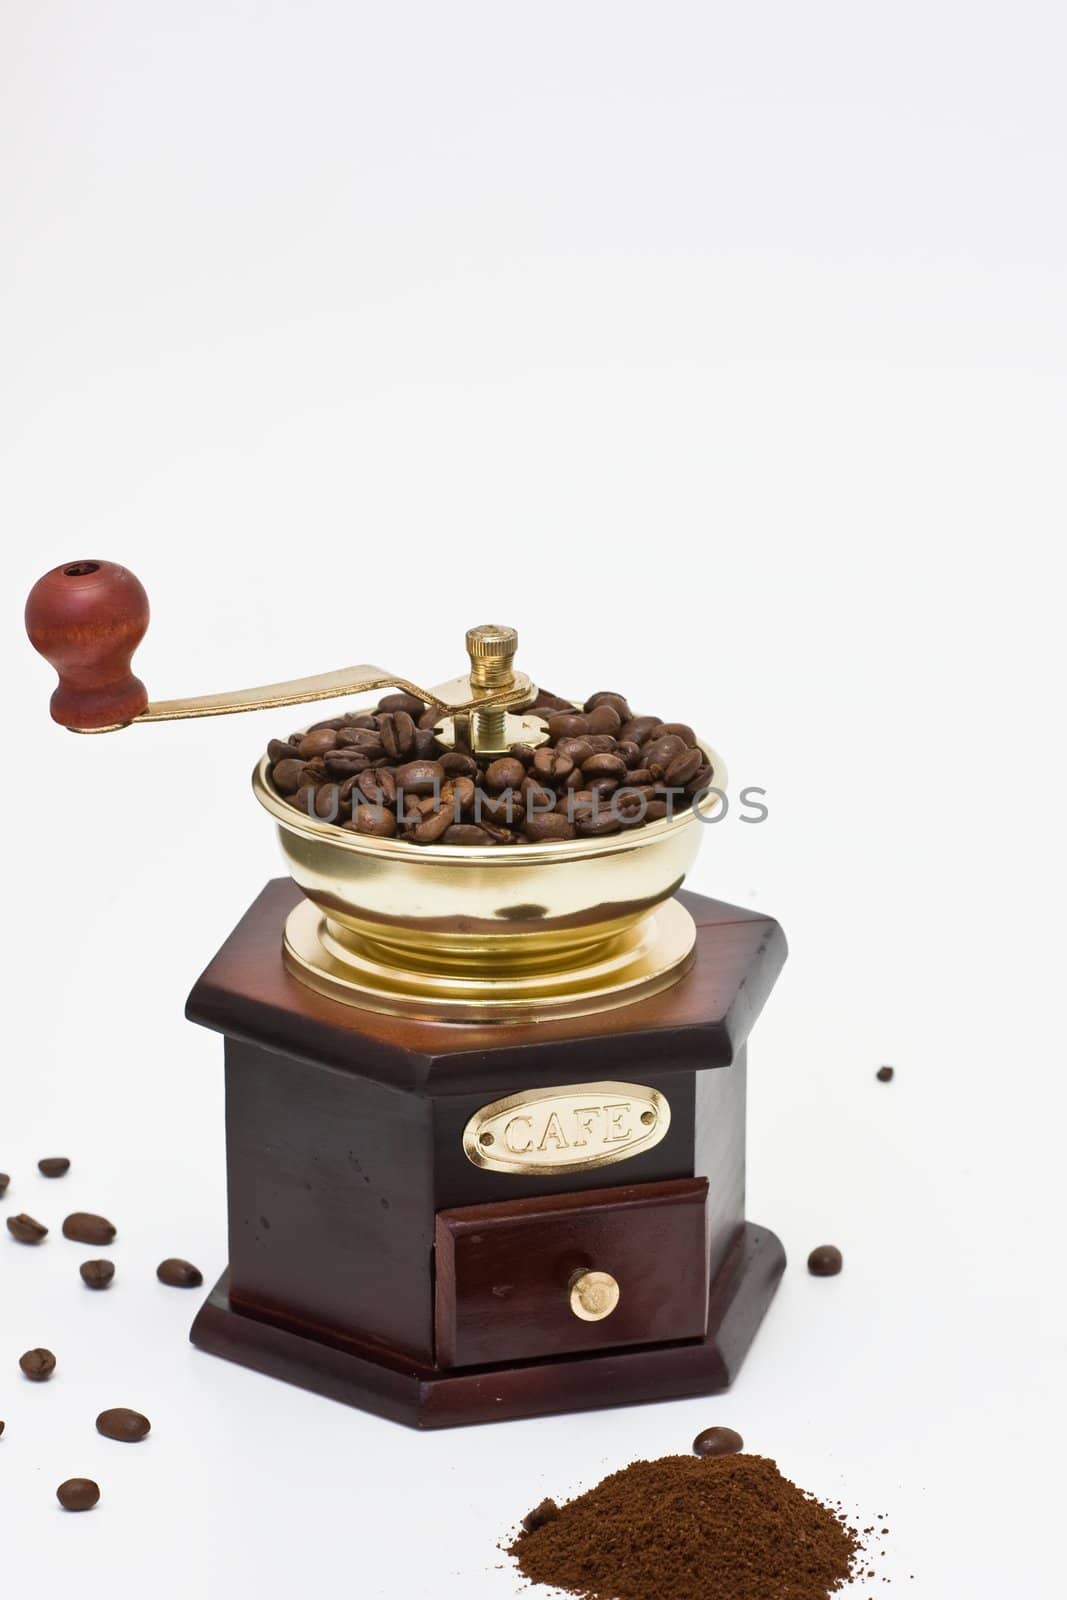 old-fashioned coffee mill on white background